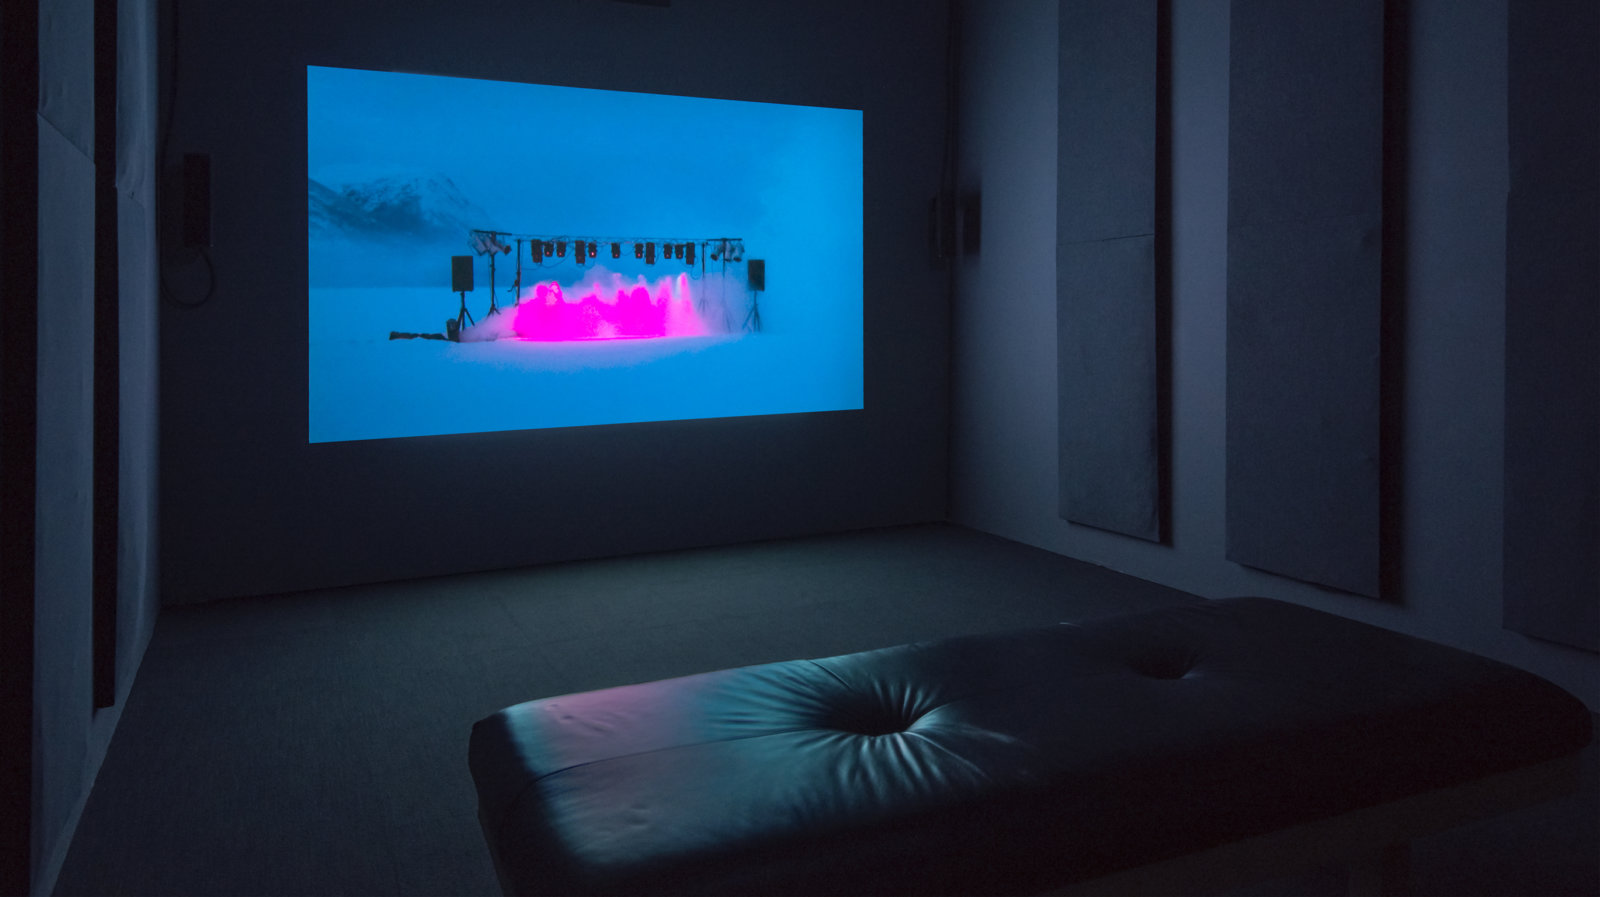 Kevin Schmidt, Wild Signals, 2007, HD video projection, 9 minutes, 42 seconds. Installation view, The Commons, Kamloops Art Gallery, Kamloops, Canada, 2015